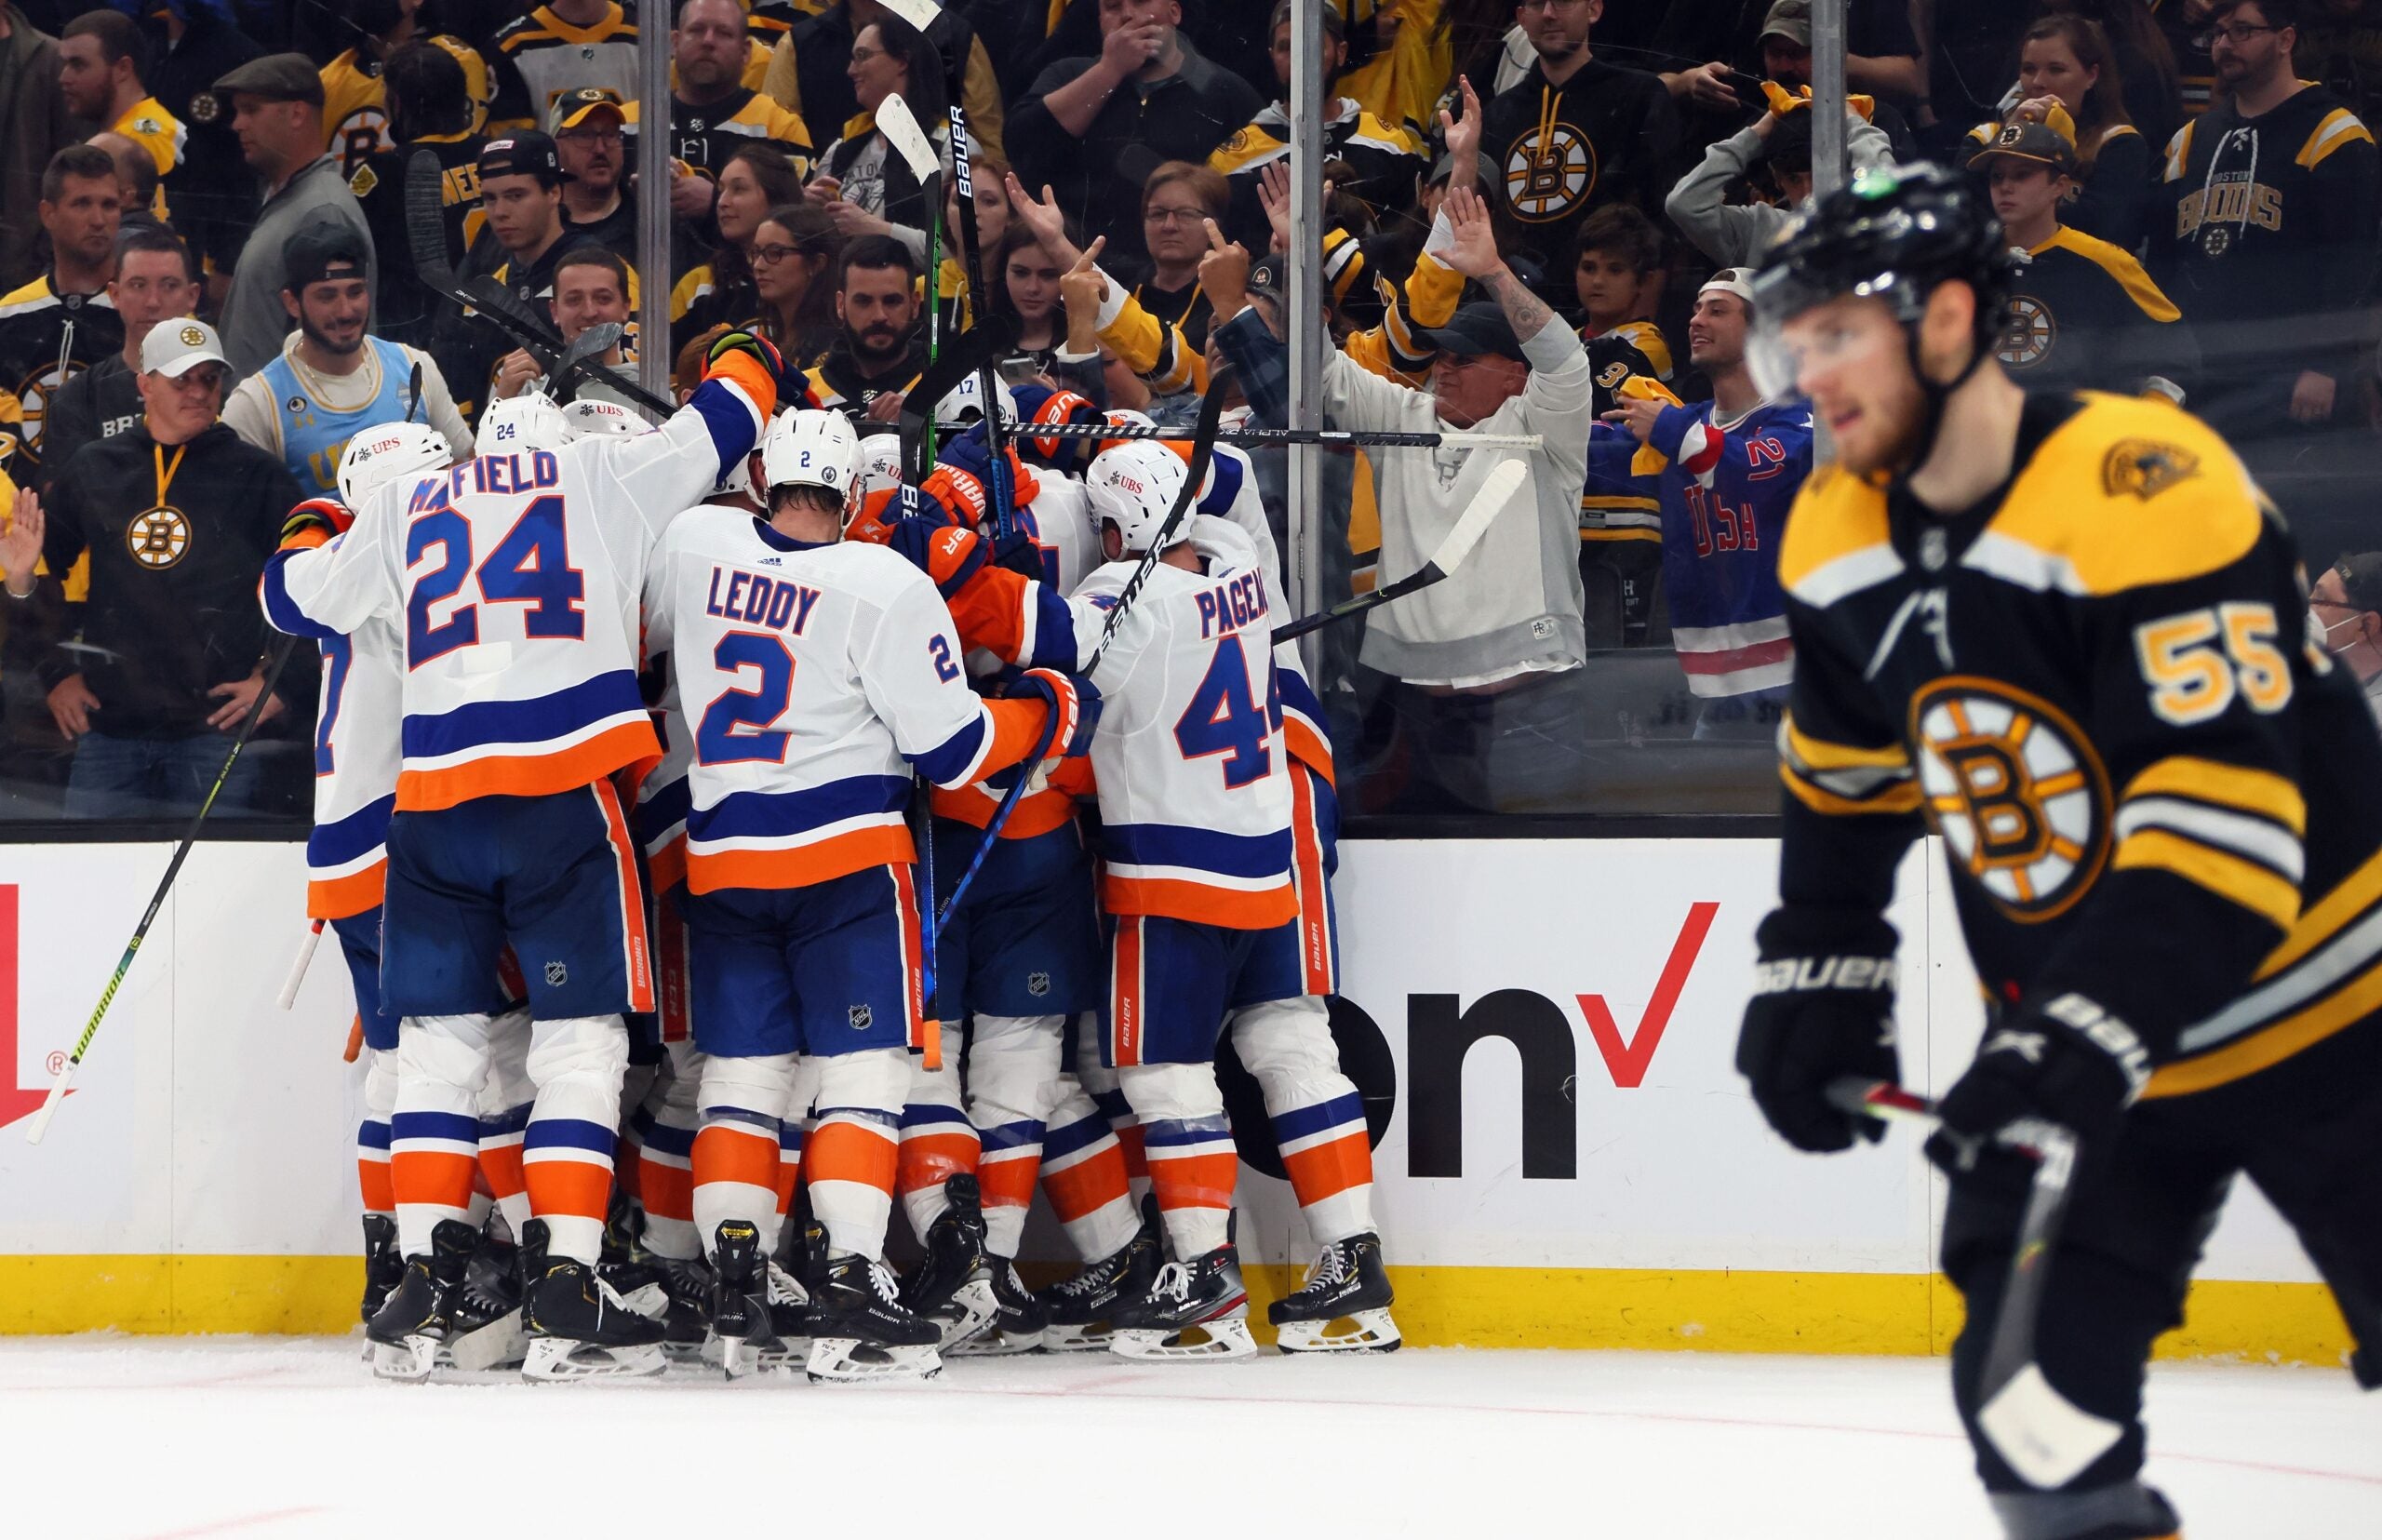 3 Takeaways Following The Bruins Game 2 Loss To The Islanders